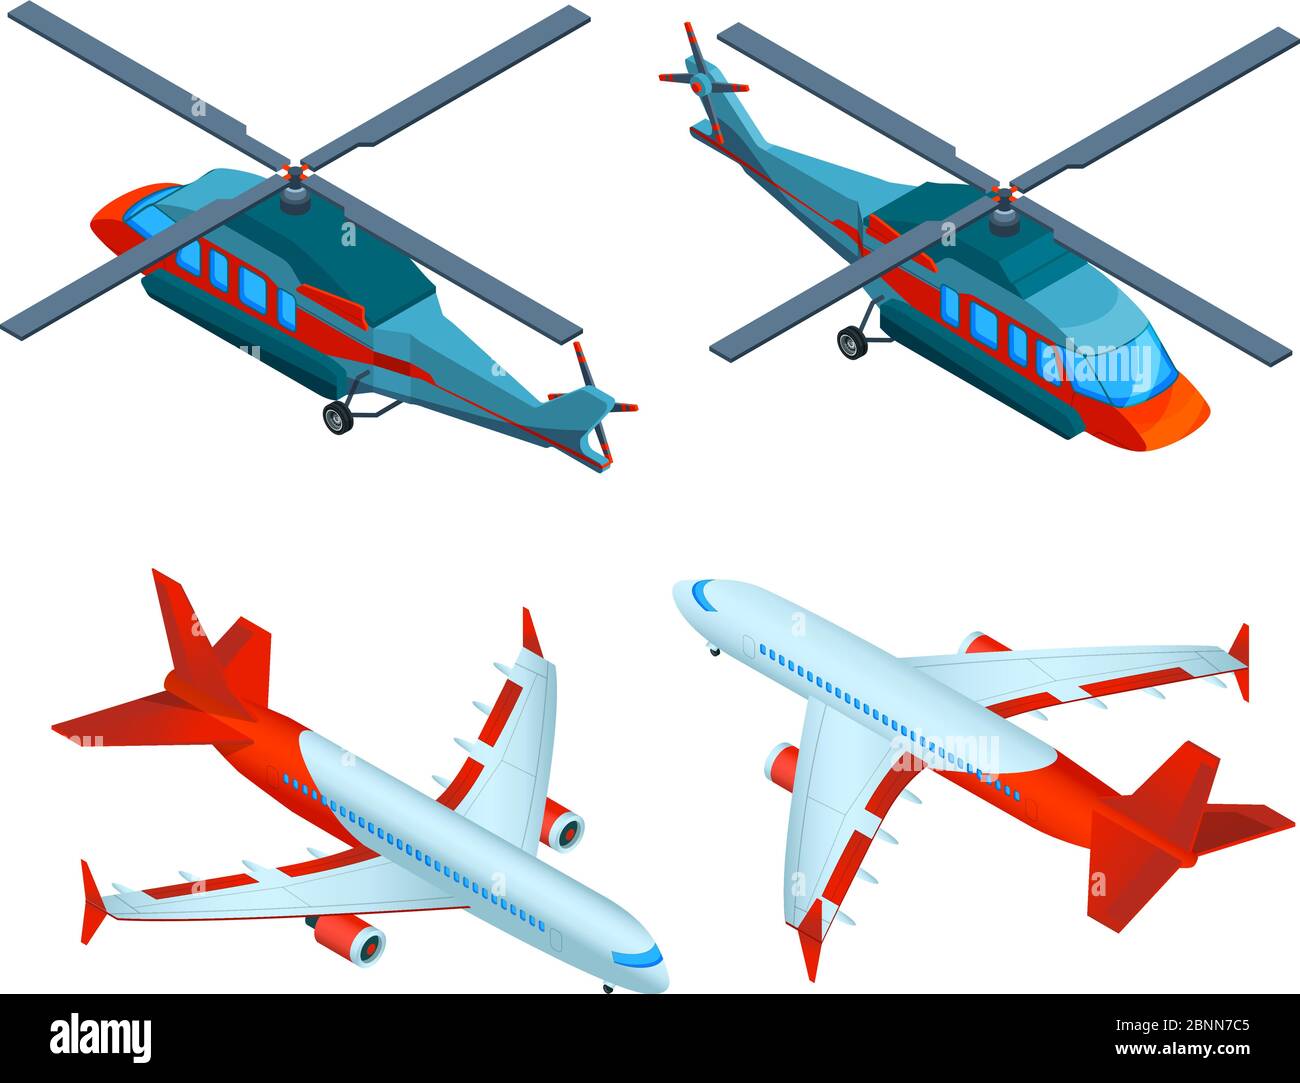 Helicopters isometric. 3d pictures of avia transport. Airplanes and helicopters Stock Vector